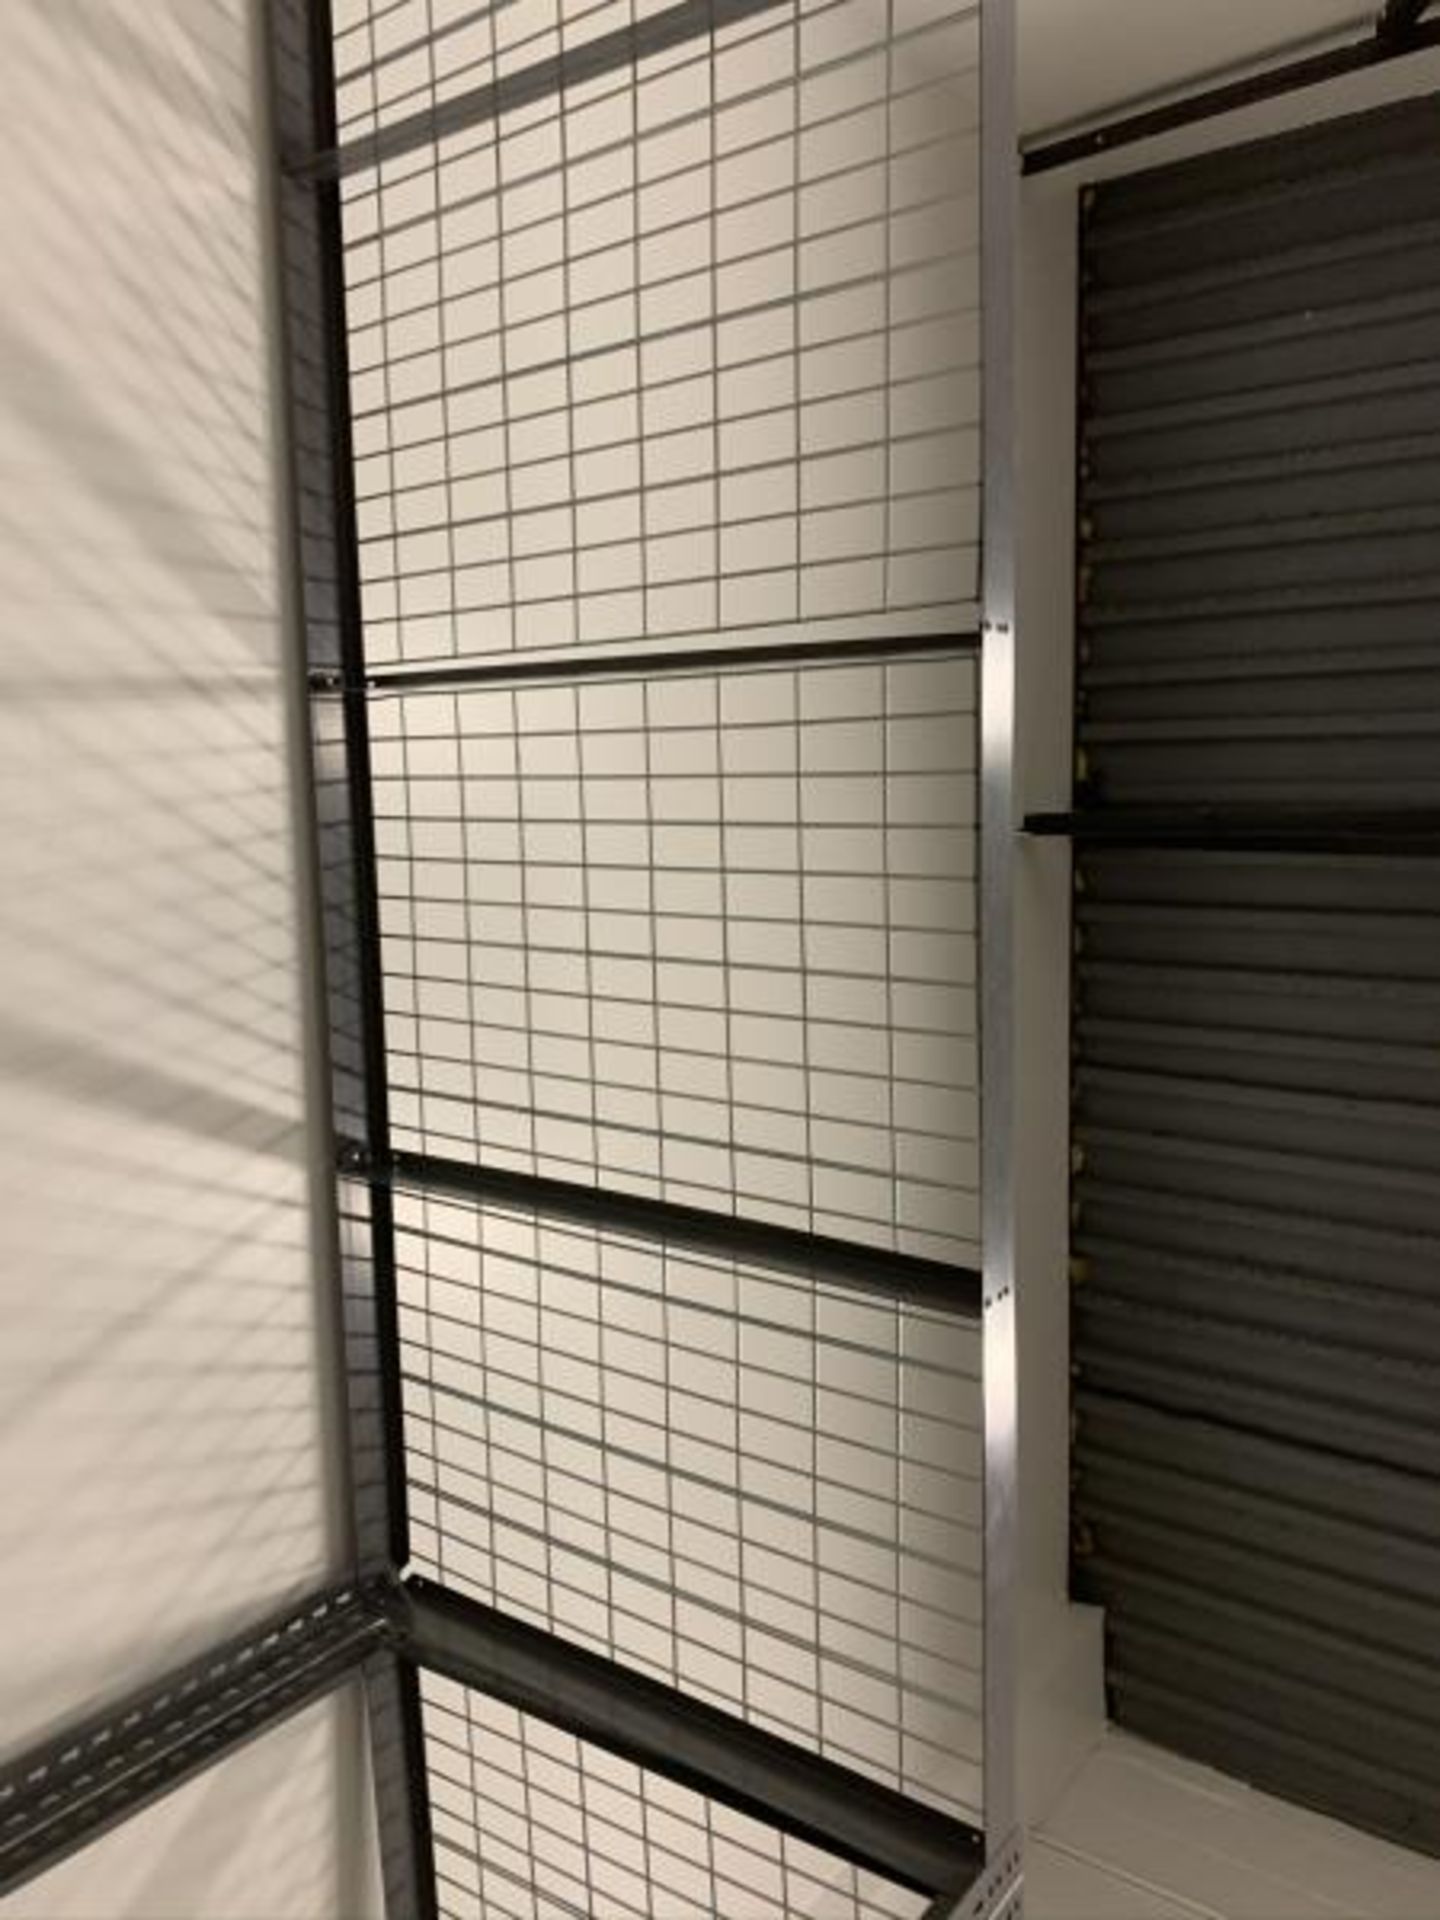 2 Sections Grey Metal Racking w/ Metal Wire Grid Shelves - Image 4 of 4